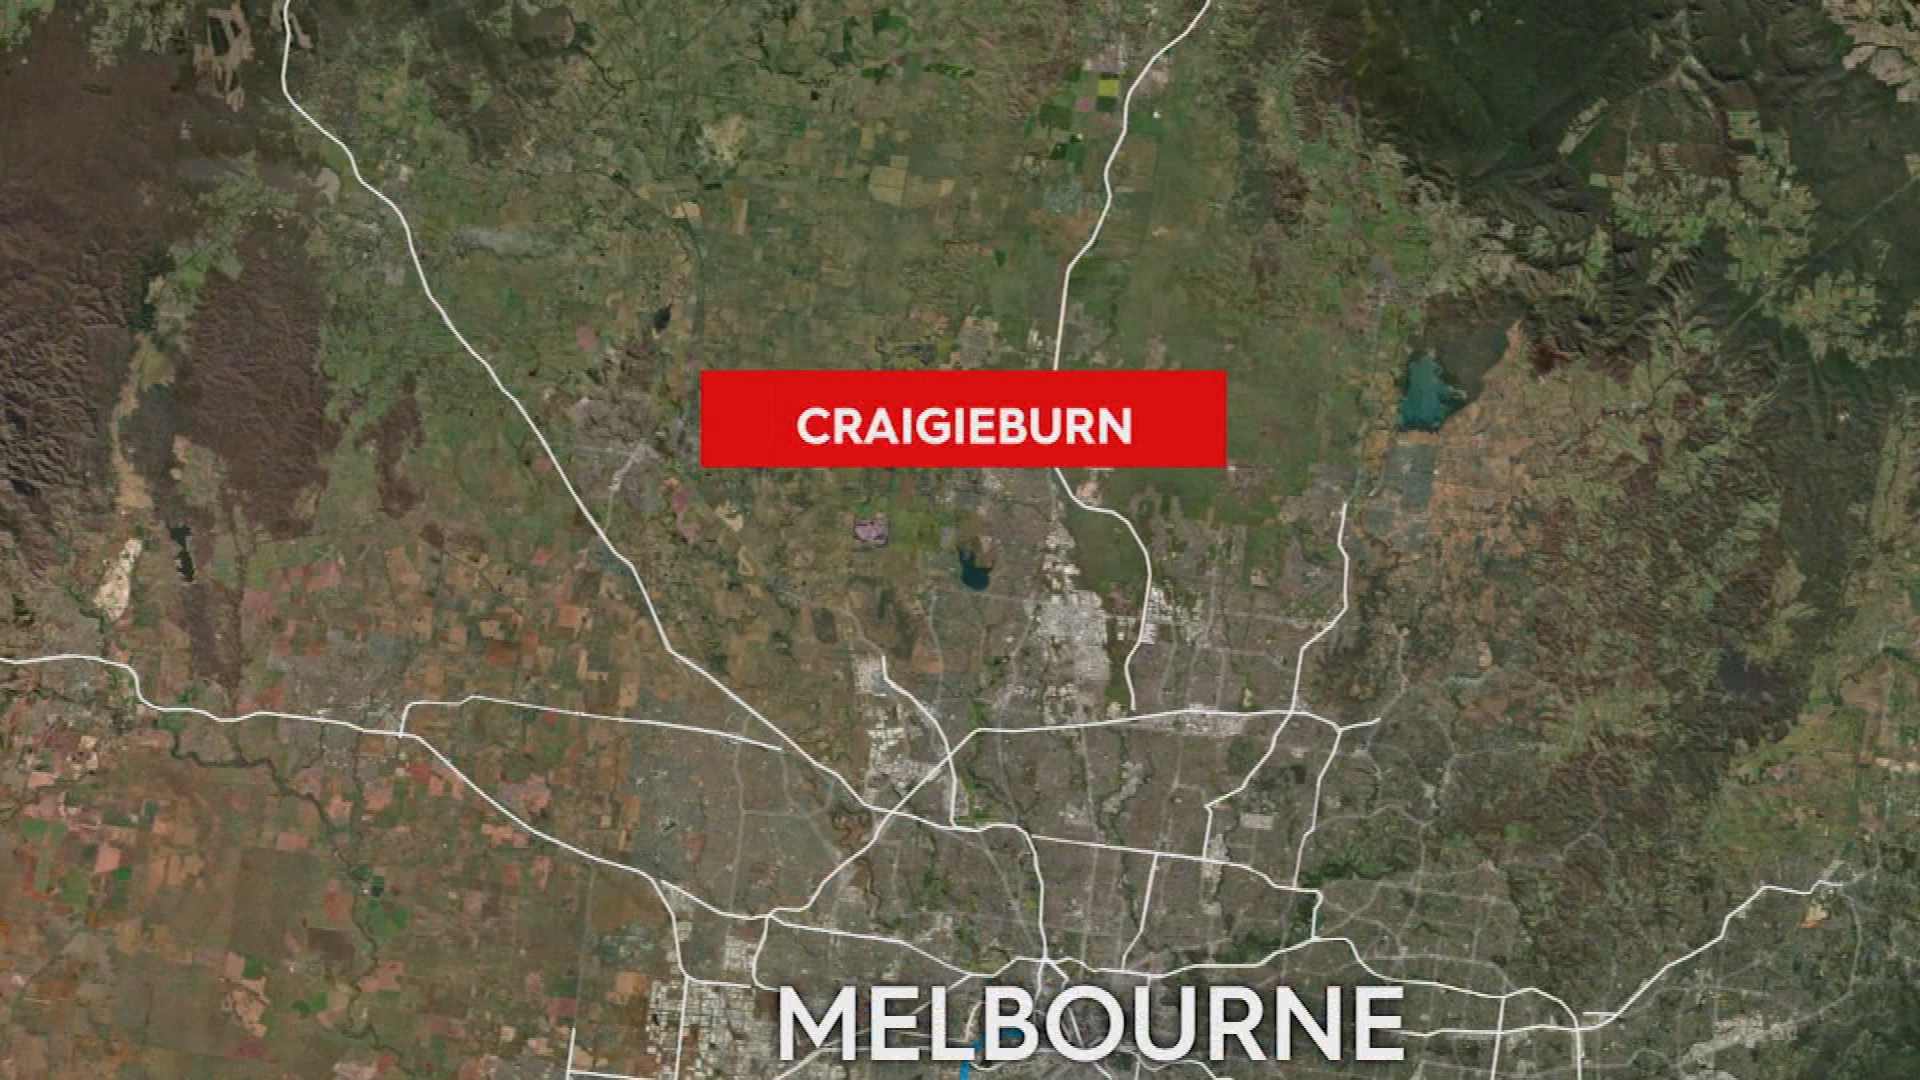 Toddler dies after collision with car in Melbourne